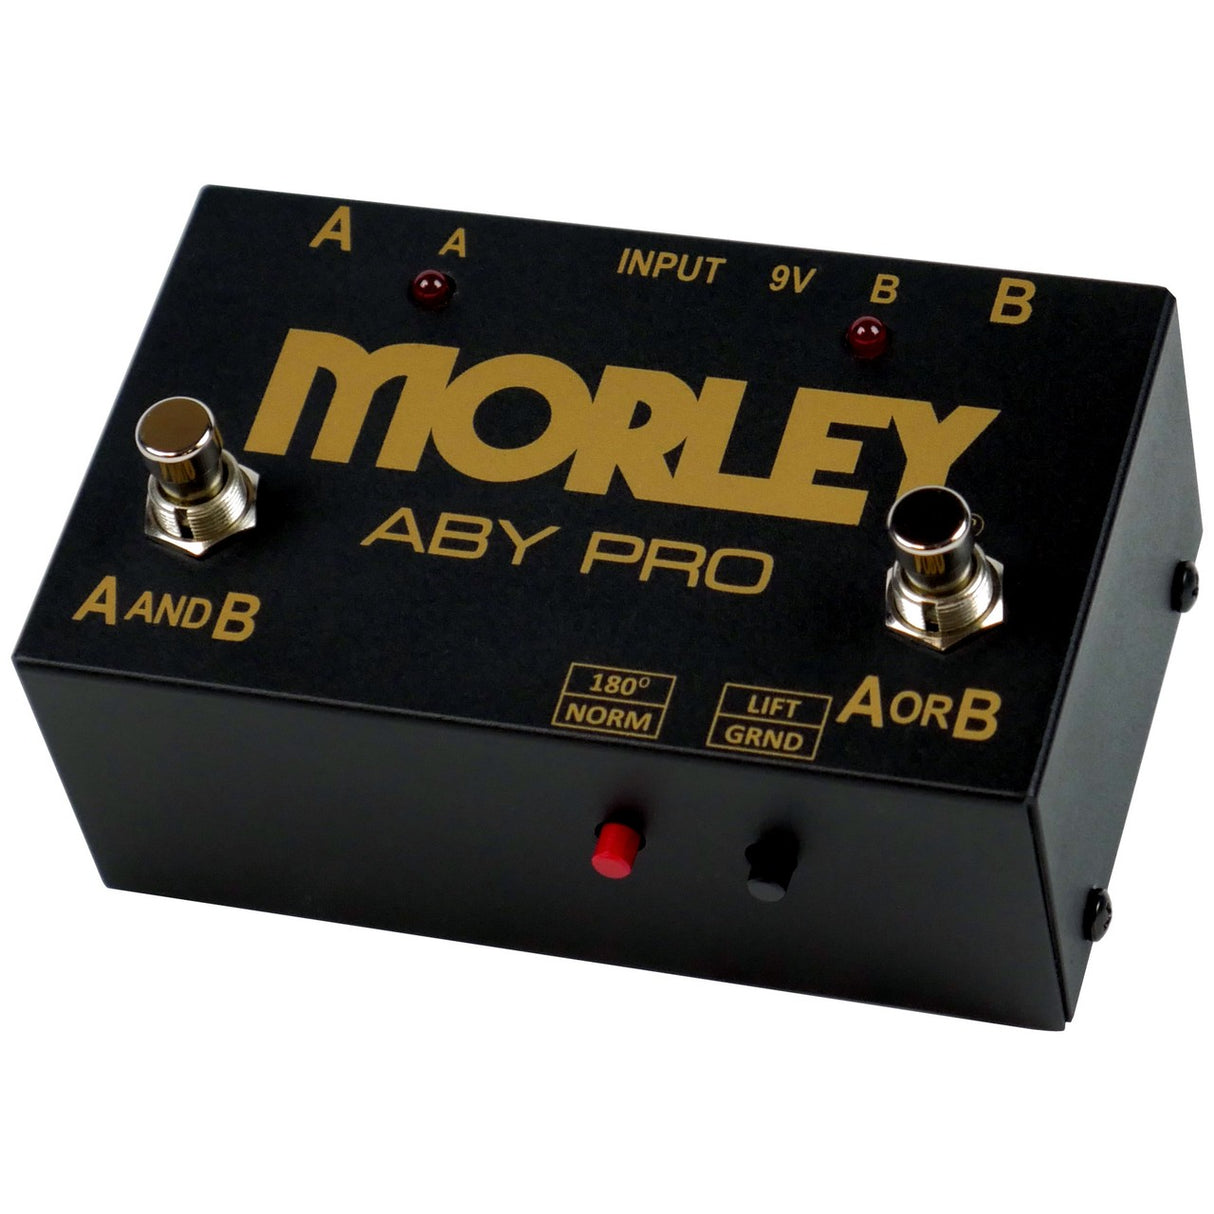 Morley ABY Pro Selector Switch